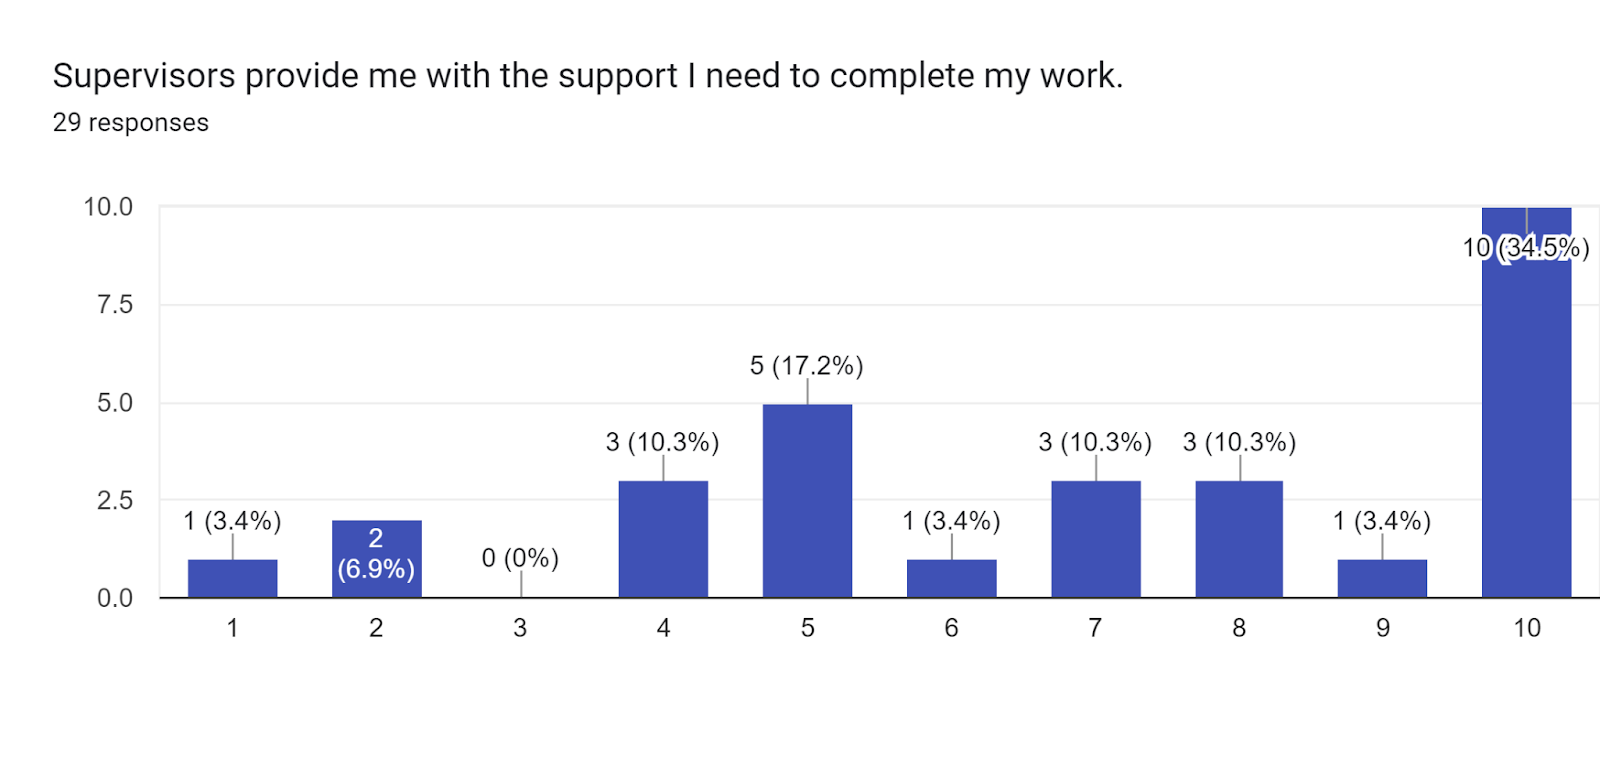 Forms response chart. Question title: Supervisors provide me with the support I need to complete my work.. Number of responses: 29 responses.